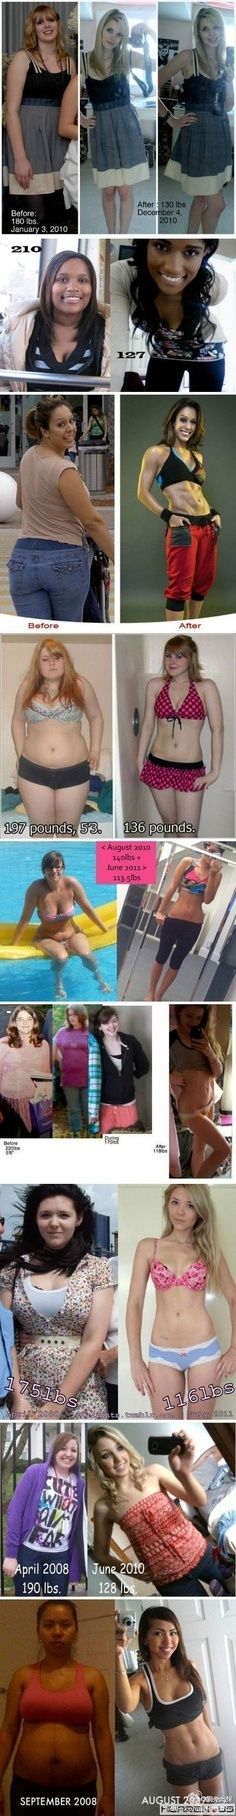 How you can do it too!..... Dream Body Transformation